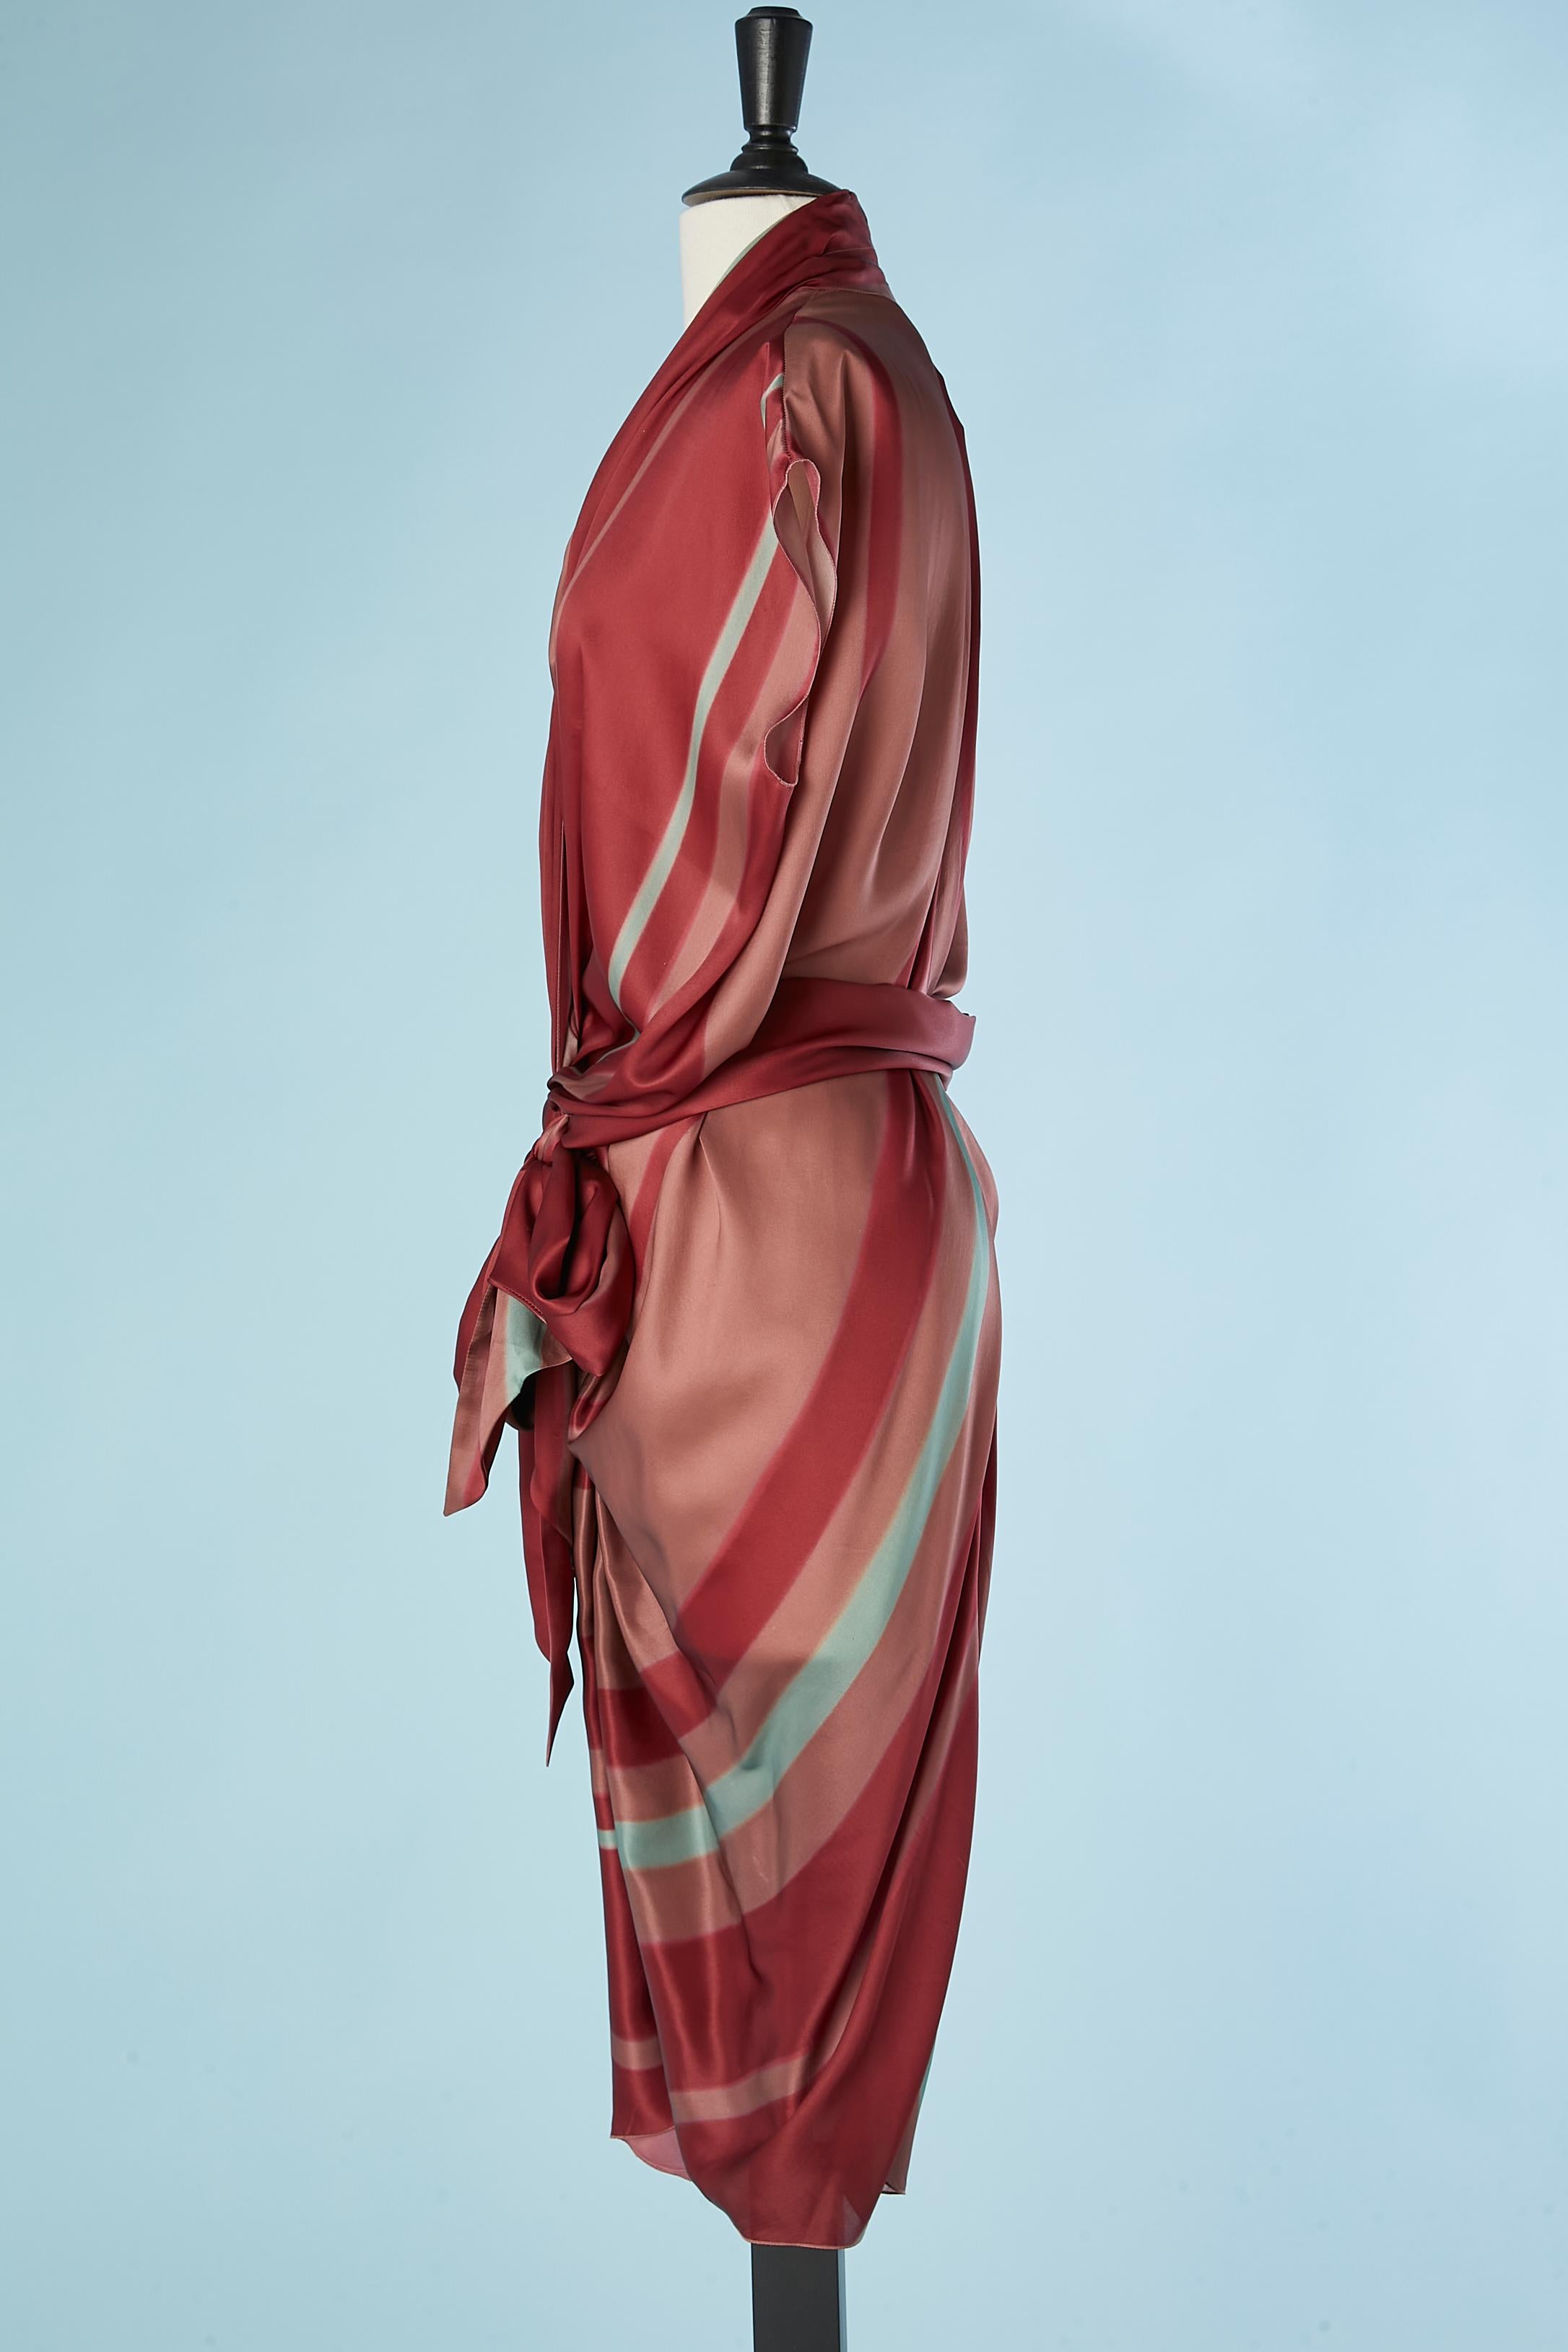 Women's Striped silk cocktail dress drape and wrap in the front Lanvin by Alber Elbaz 